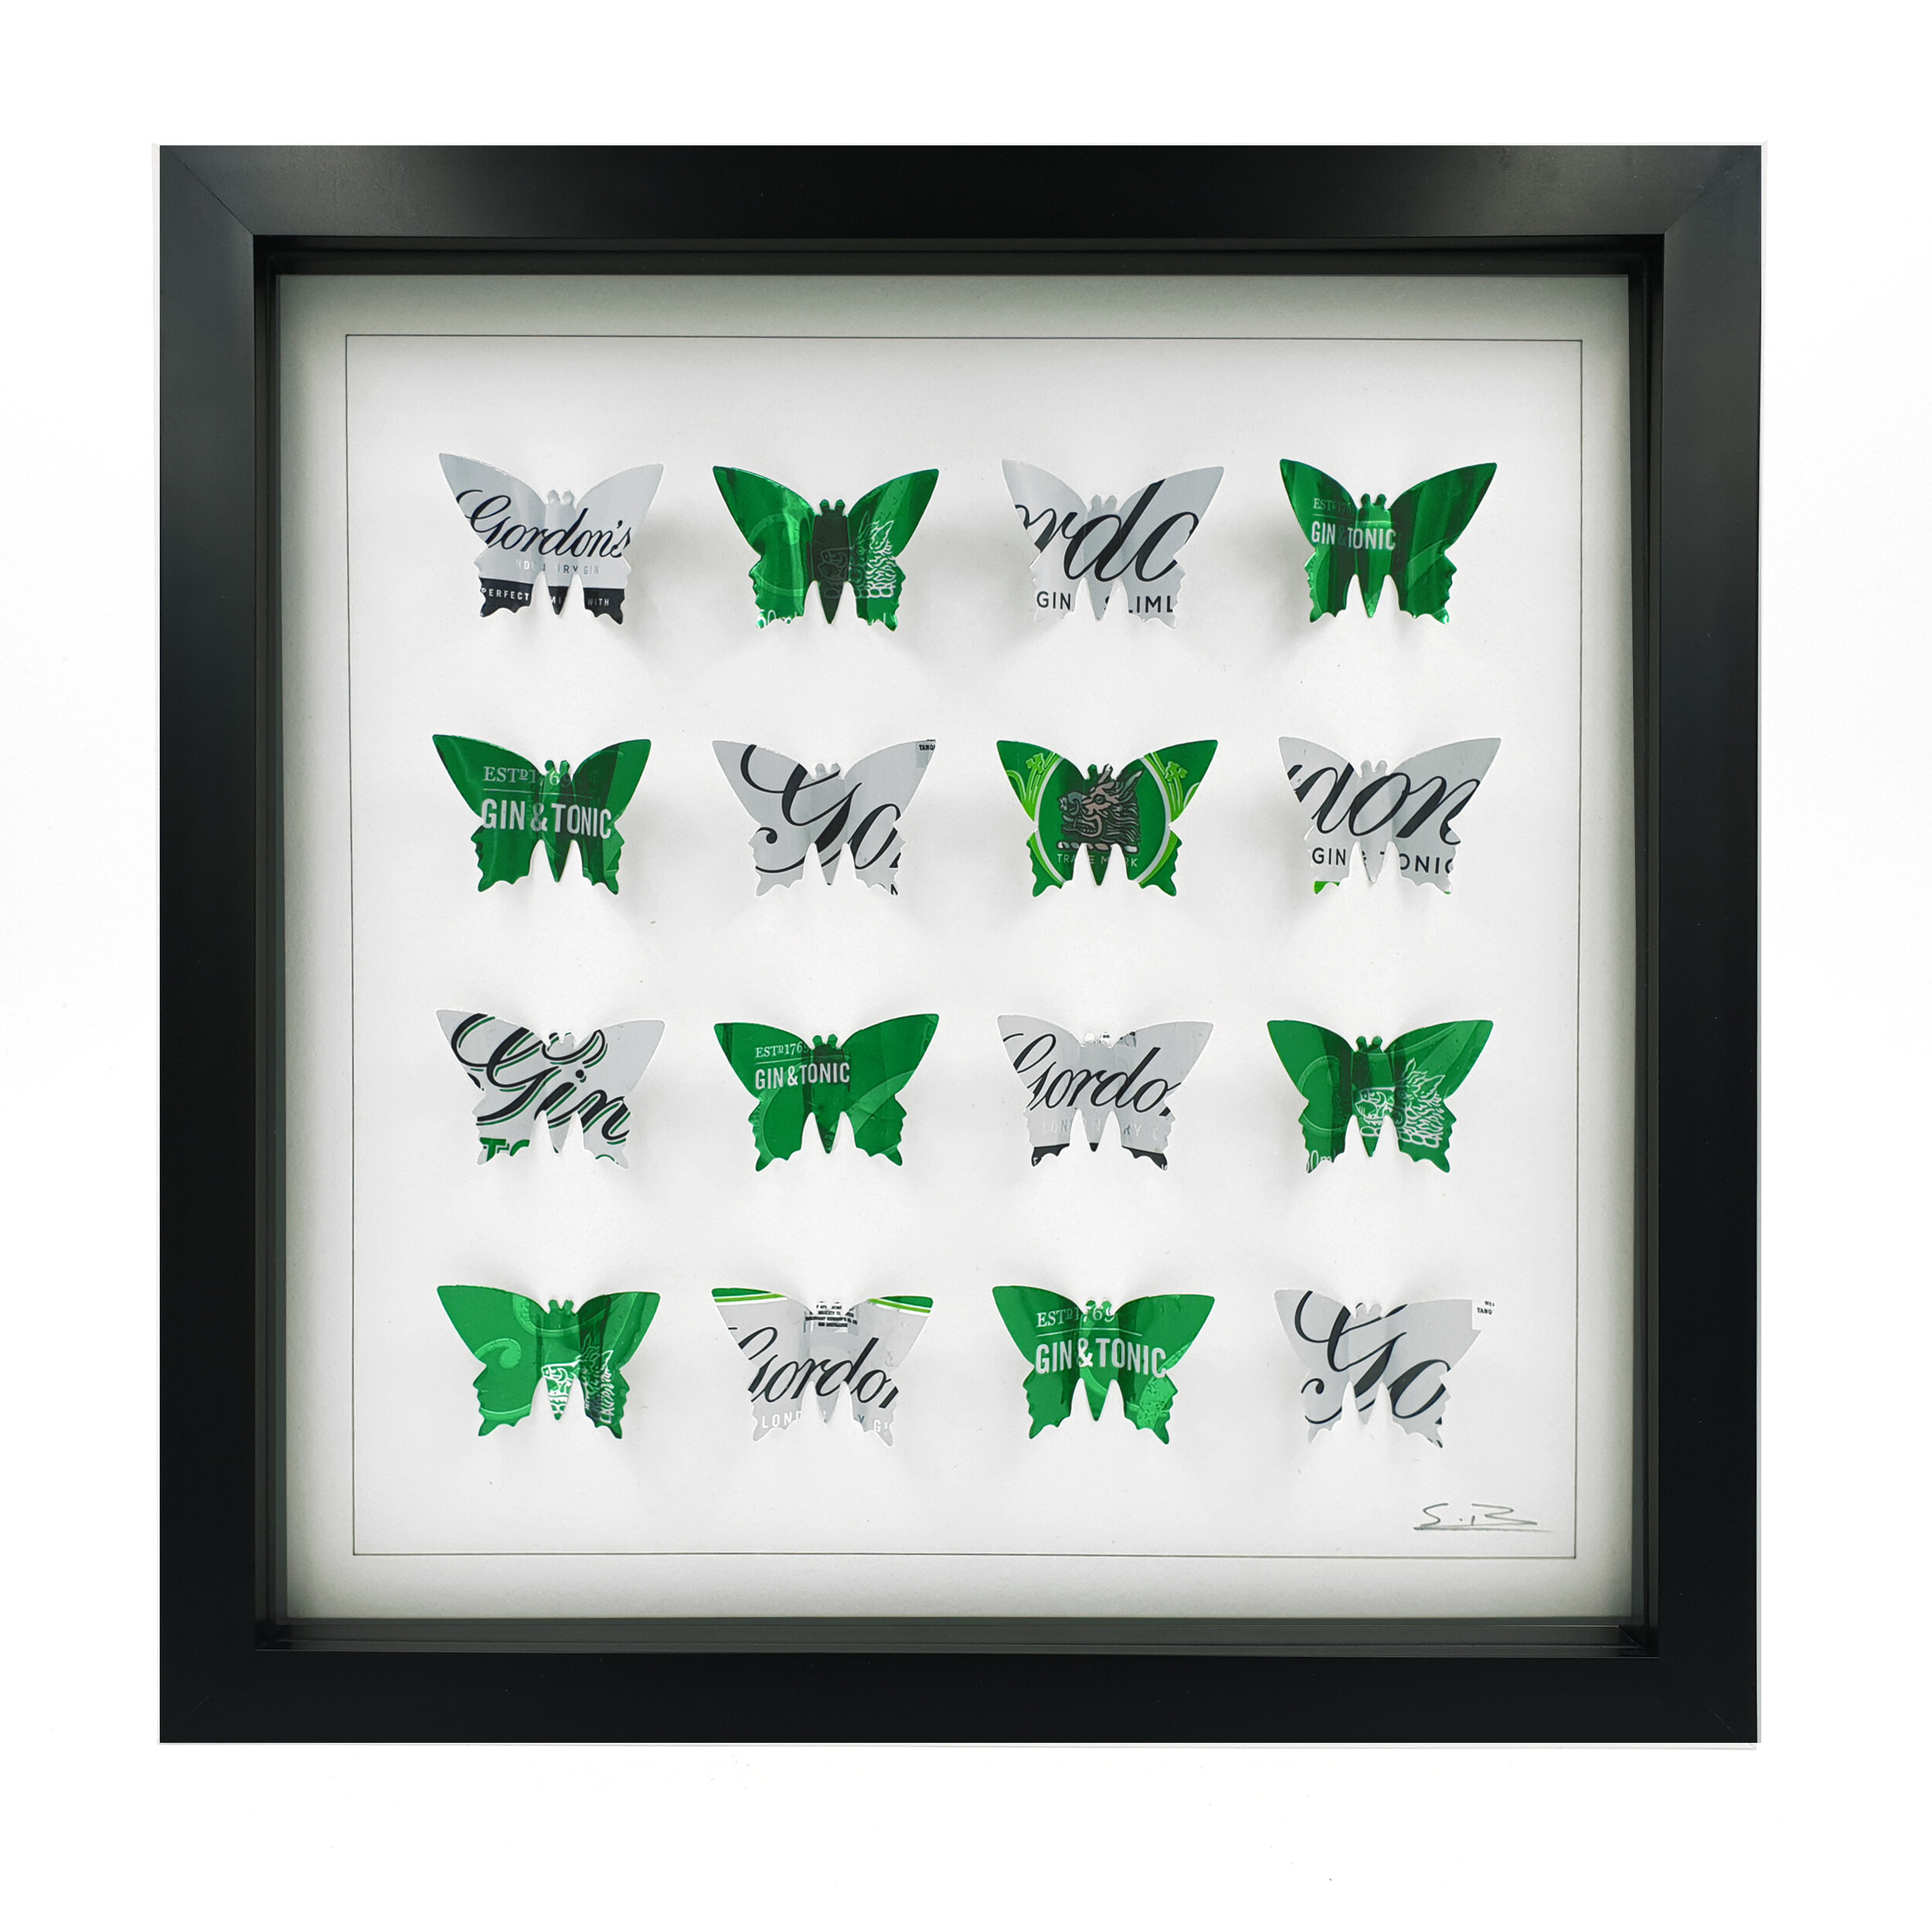  Gin and Tonic green and white 4x4 butterfly pattern black frame